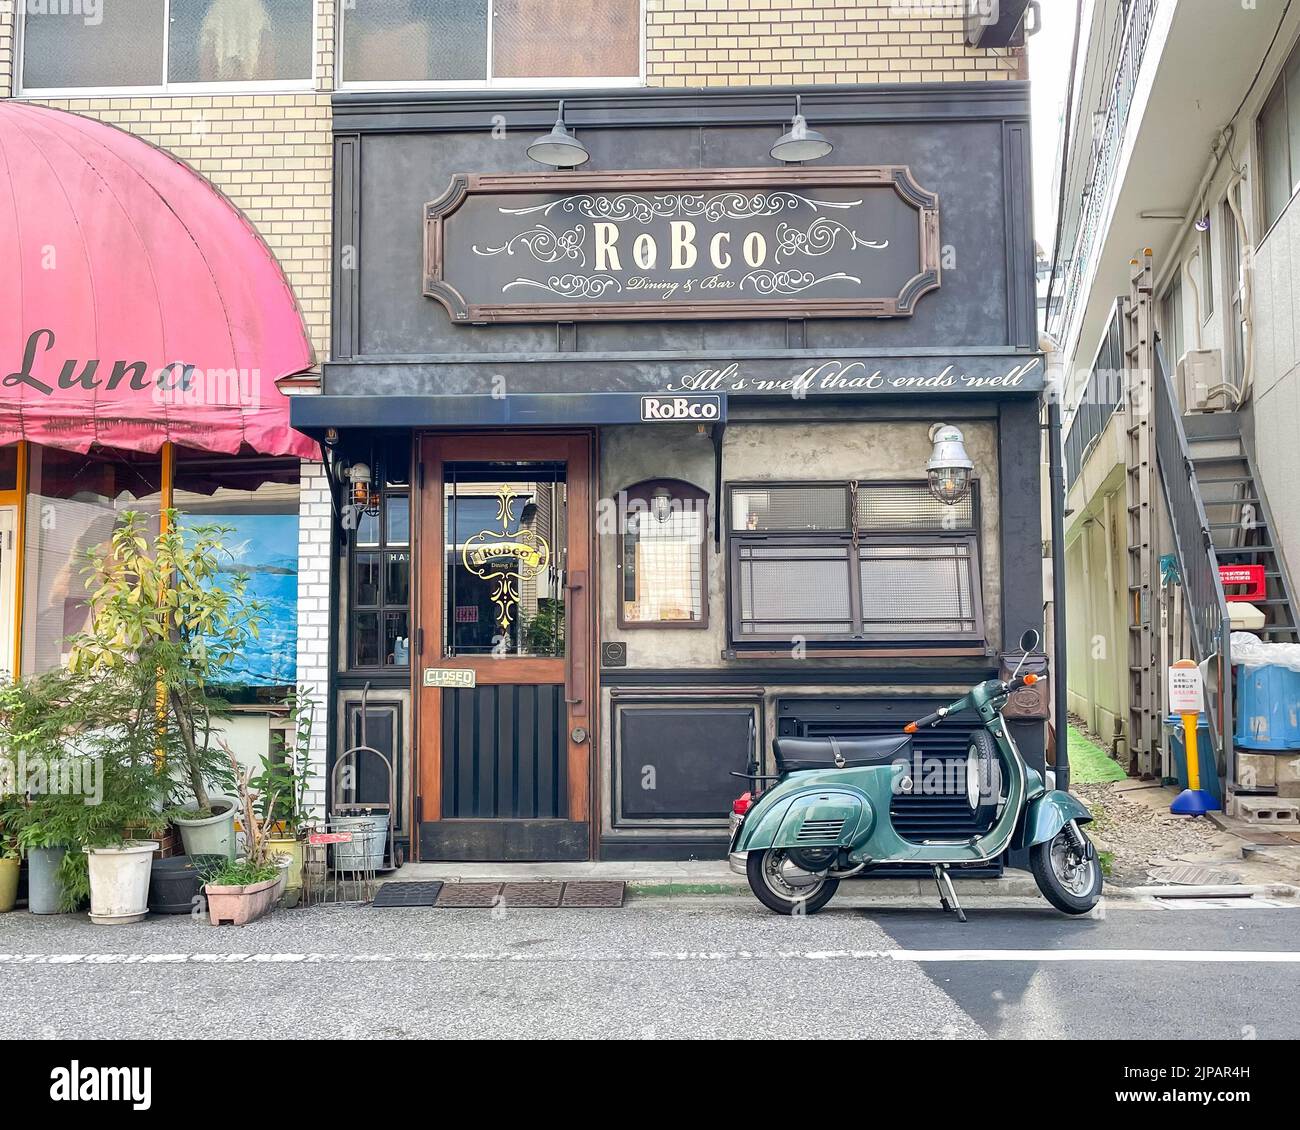 An exterior shot of  Robco Dinning Bar along a busy tourist street with a retro storefront and a blue scooter parked out front. Stock Photo